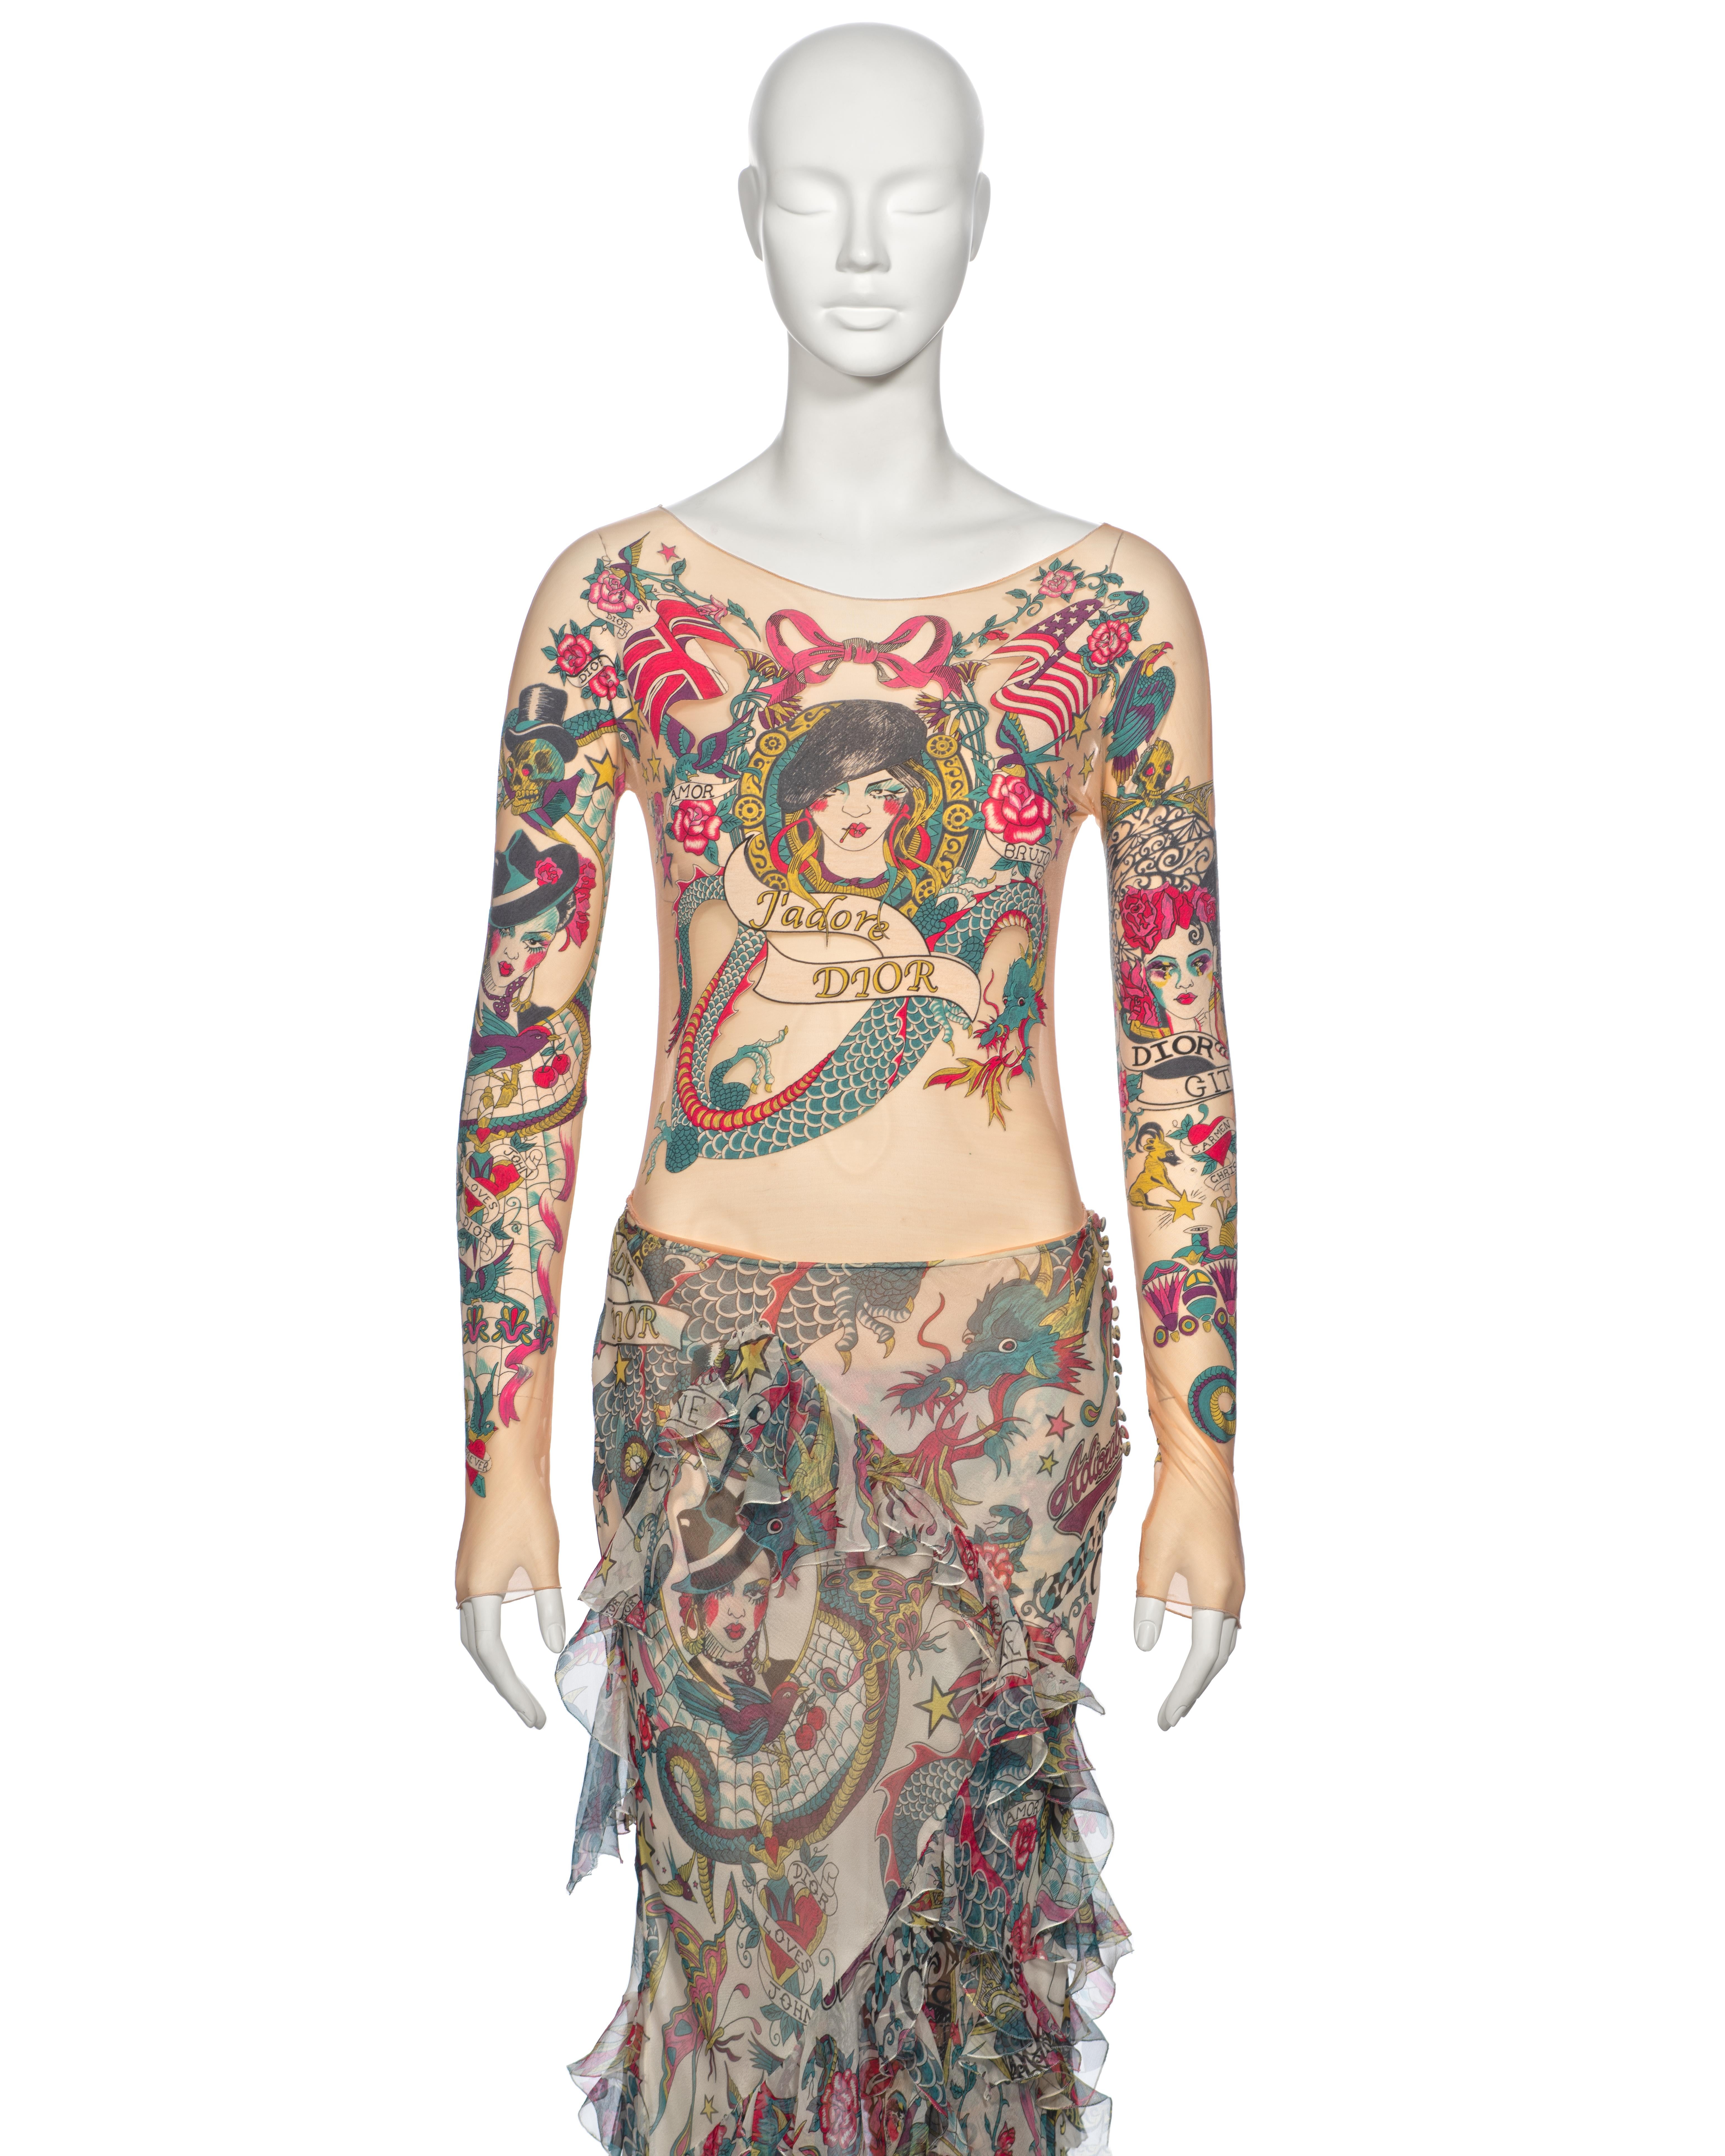 Christian Dior by John Galliano Tattoo Print Body, Leggings and Skirt, ss 2004 In Excellent Condition For Sale In London, GB